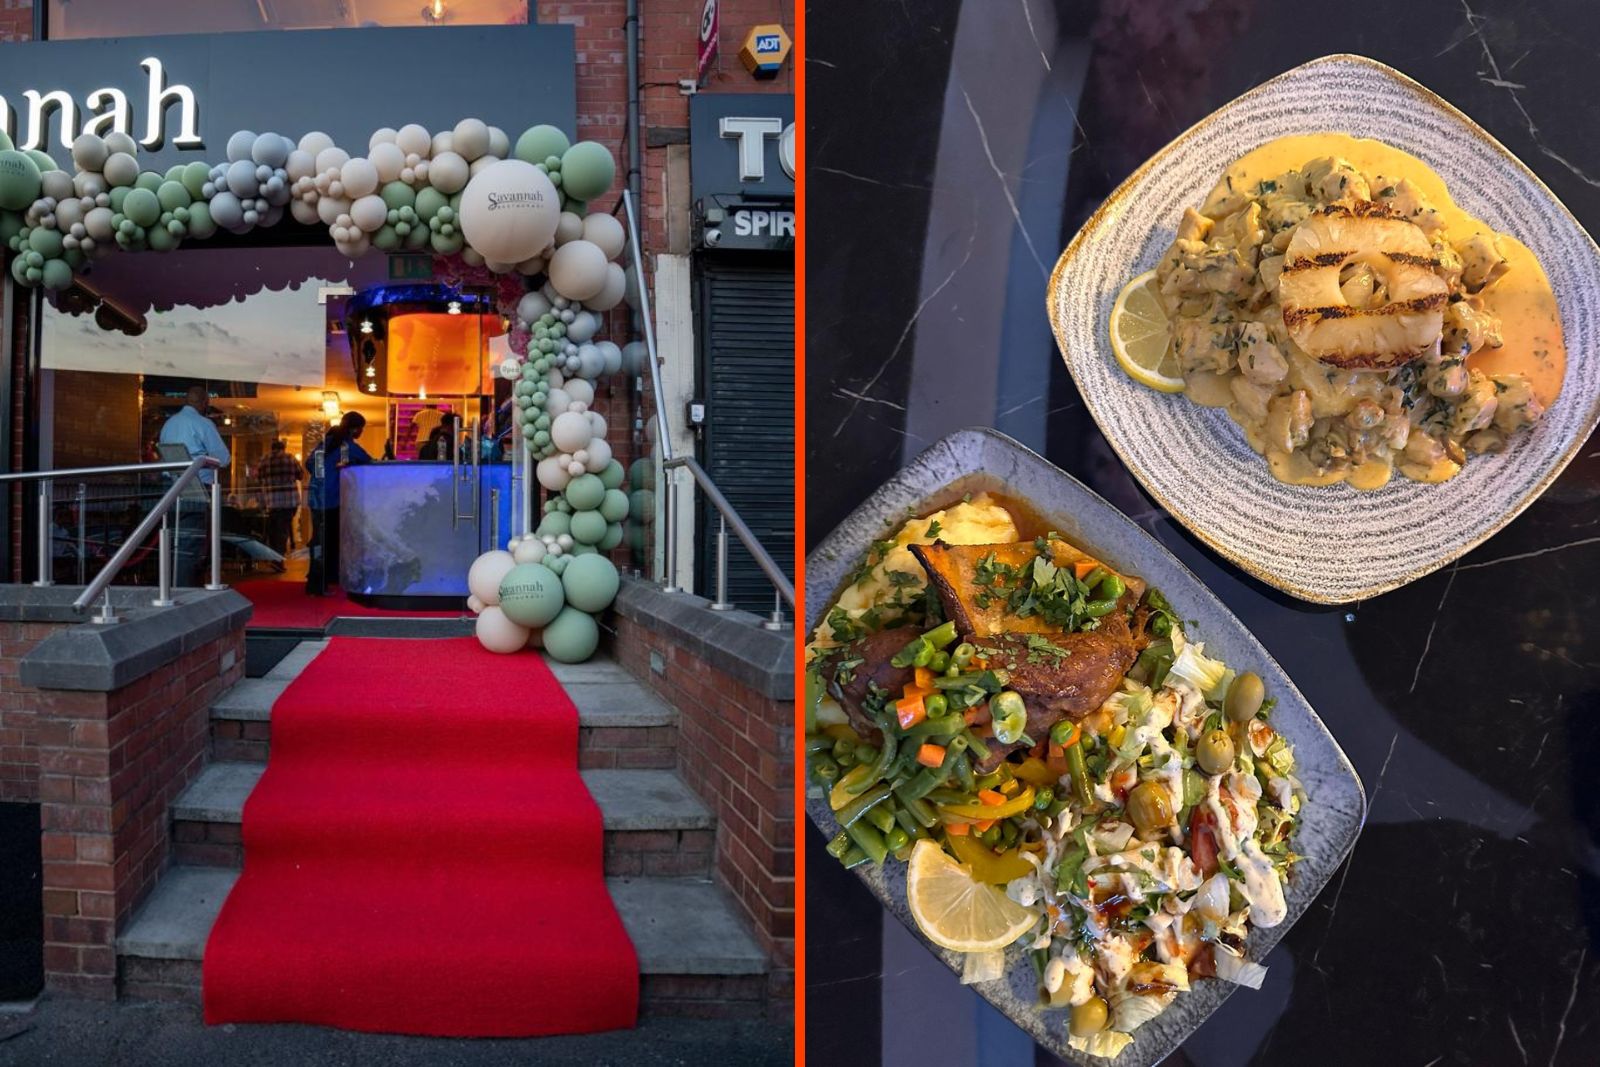 A composite of two images: on the left, the entrance to Savannah restaurant in Birmingham. On the right, two meat-based dishes.